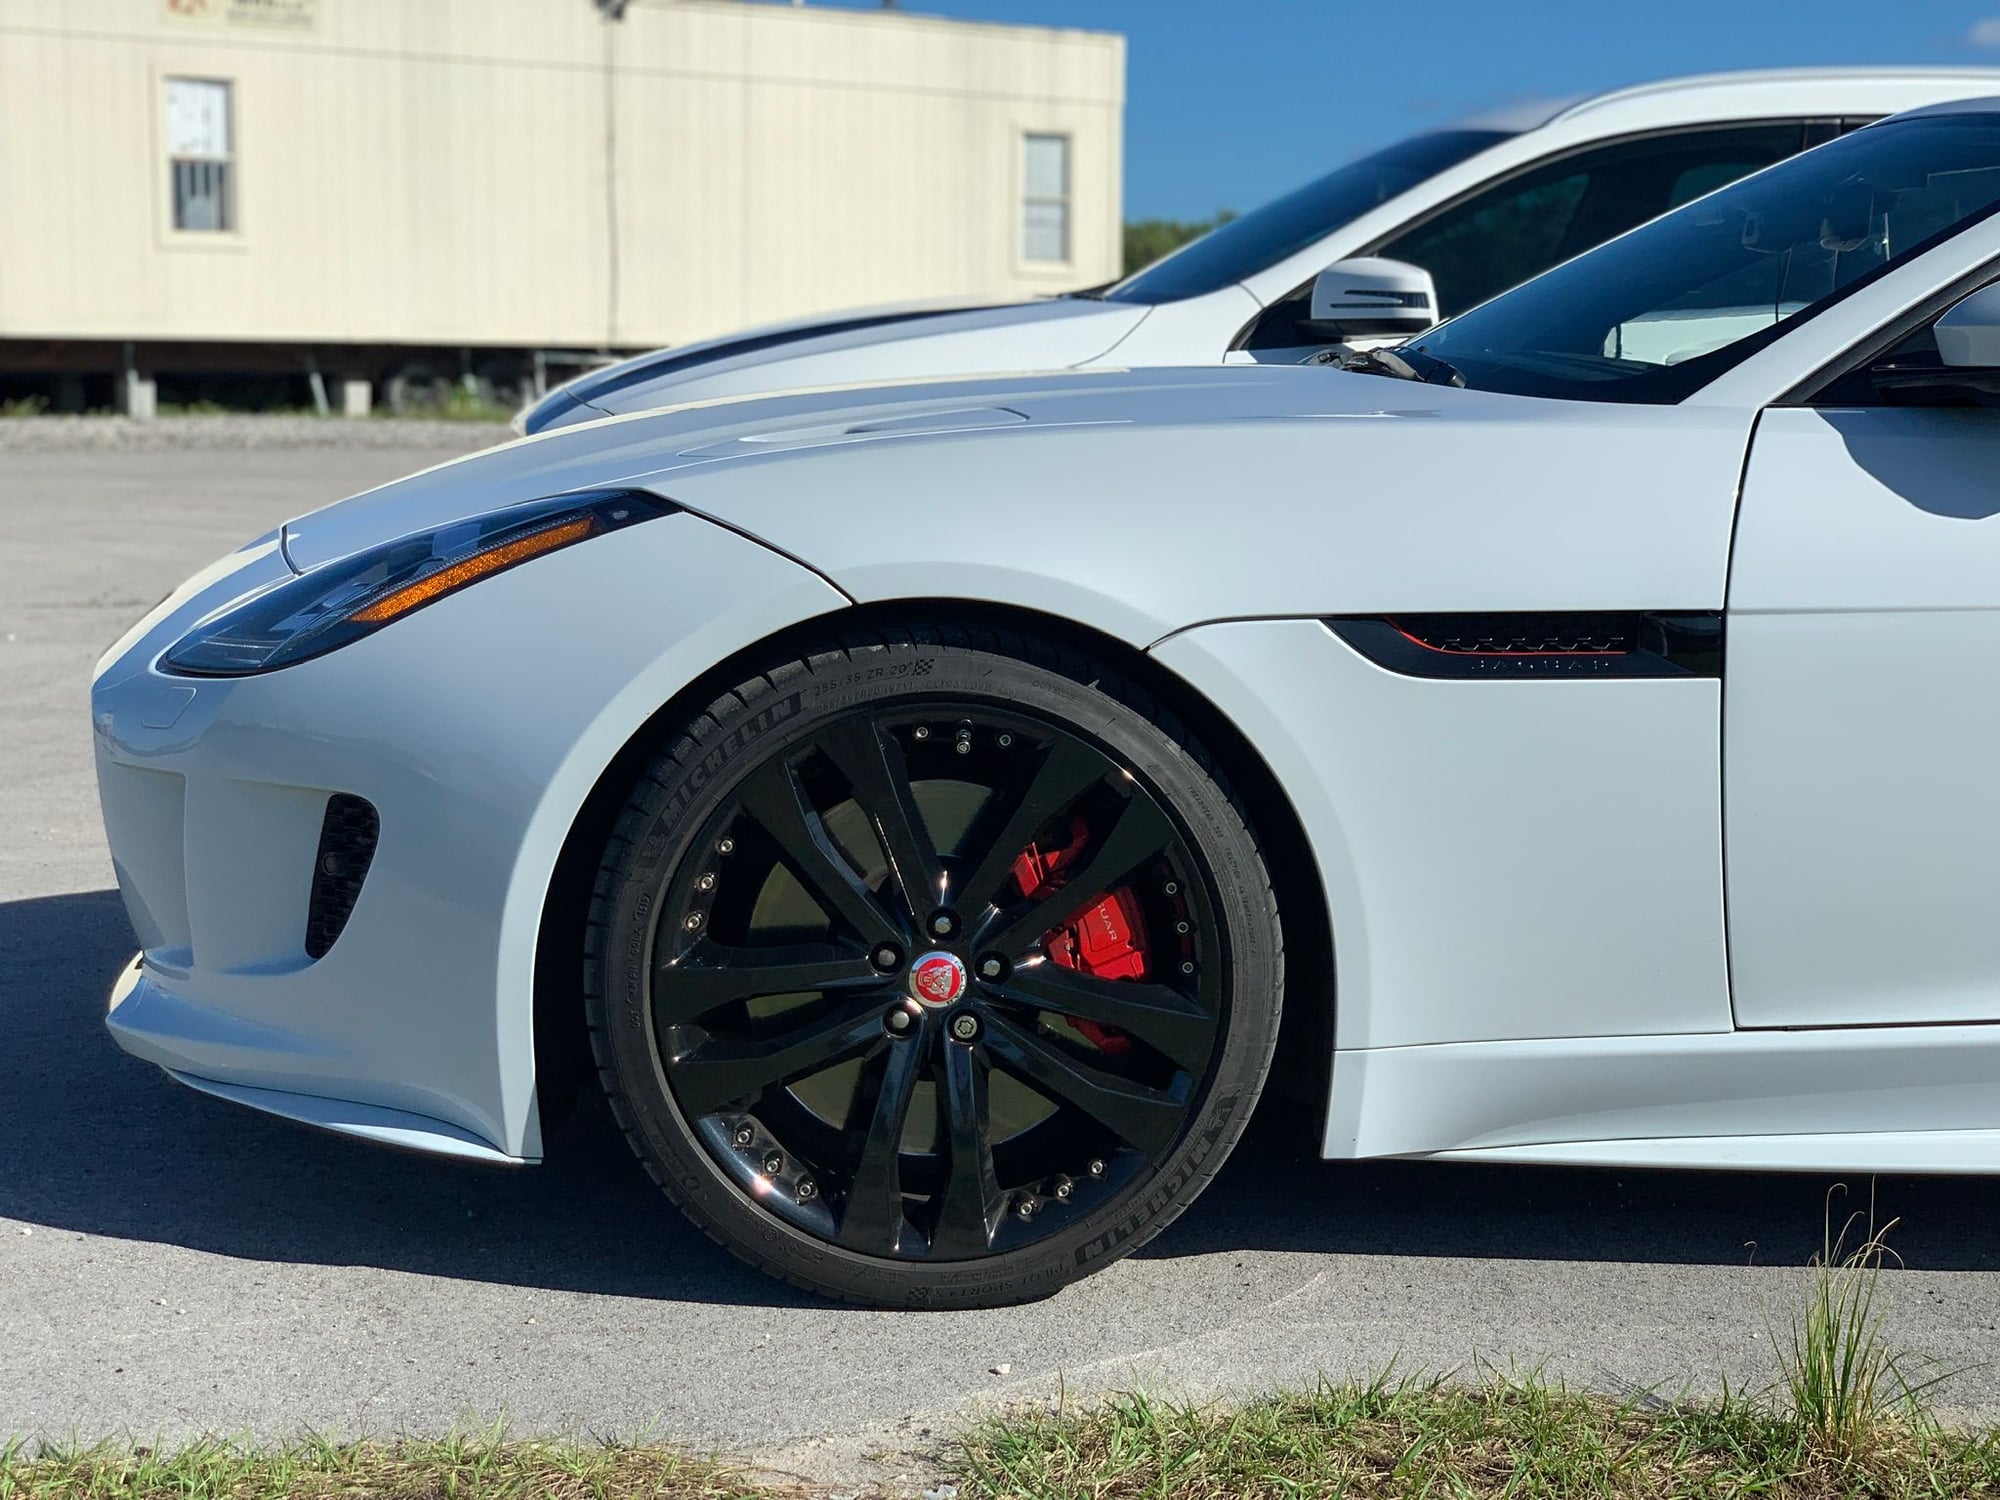 2016 Jaguar F-Type - 2016 Jaguar F-Type S AWD convertible W/3yrs Warranty - Used - VIN Sajwj6fv8g8k29696 - 28,710 Miles - 6 cyl - AWD - Automatic - Convertible - White - Hallendale, FL 33009, United States